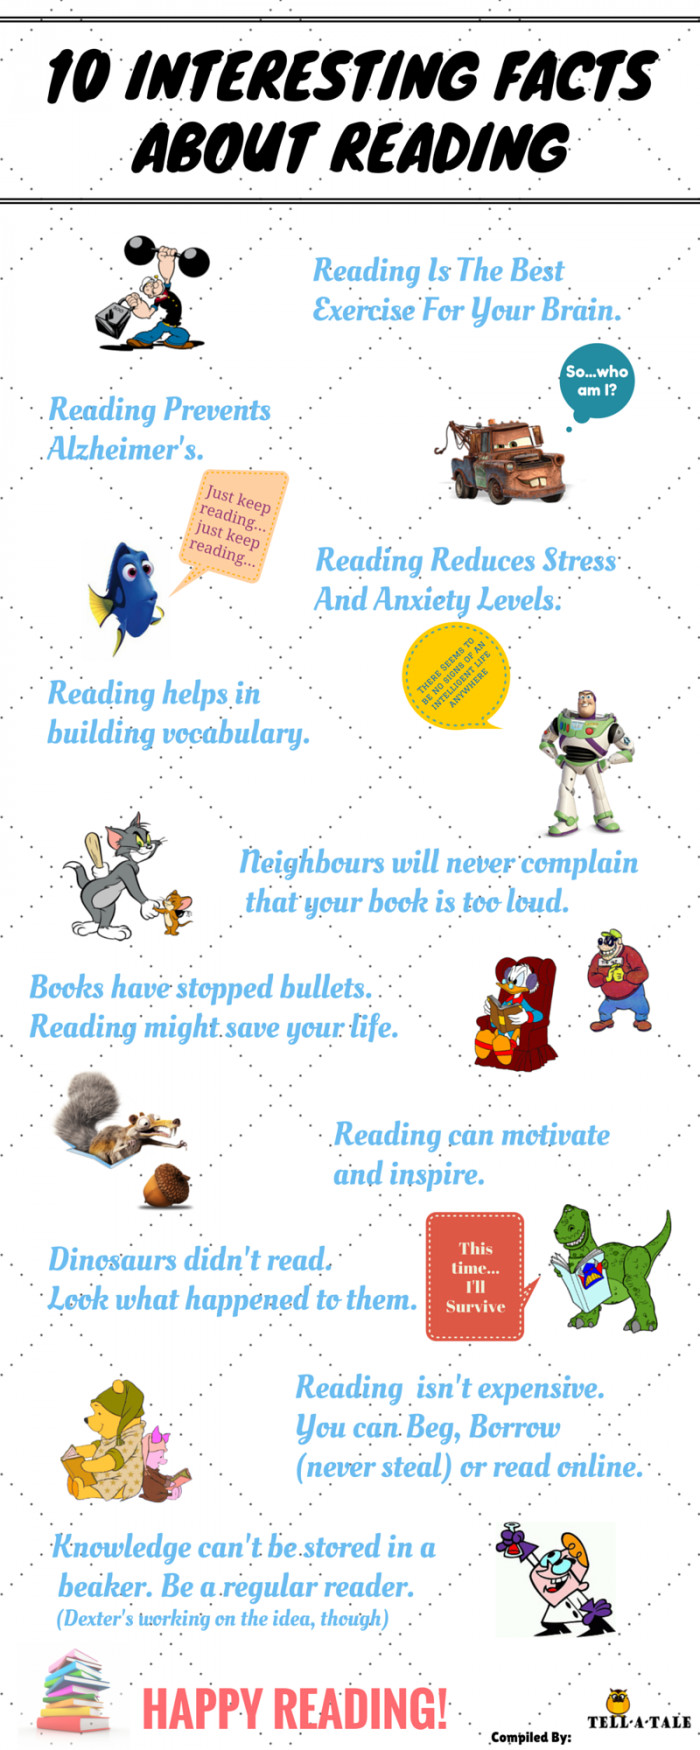 10 Interesting Facts About Reading You Need To Know